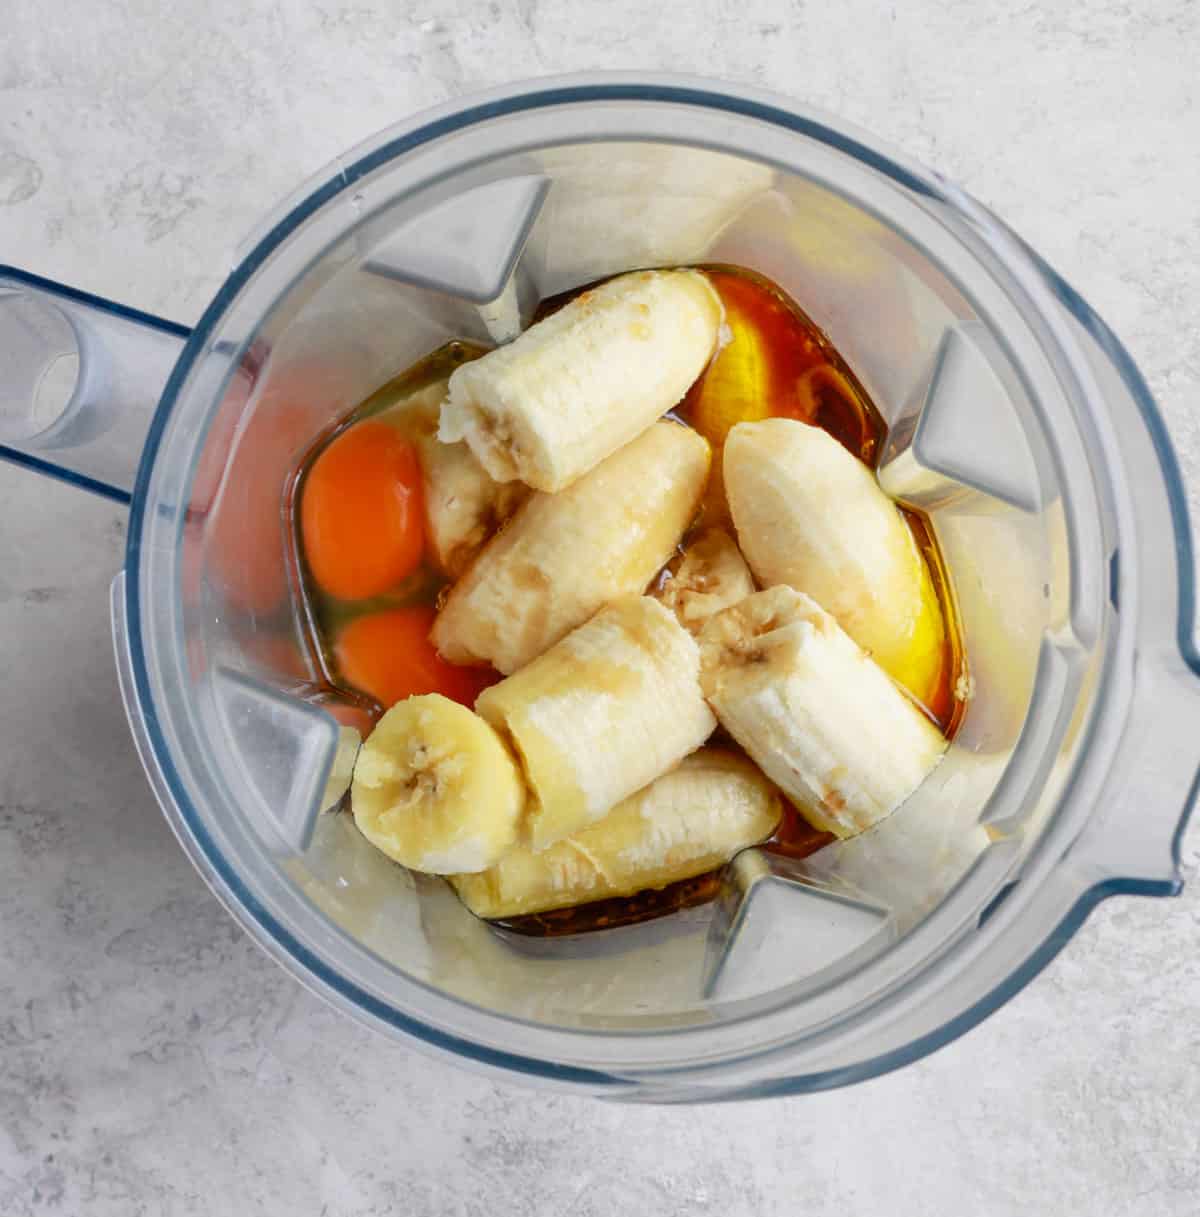 a high-speed blender with bananas in it